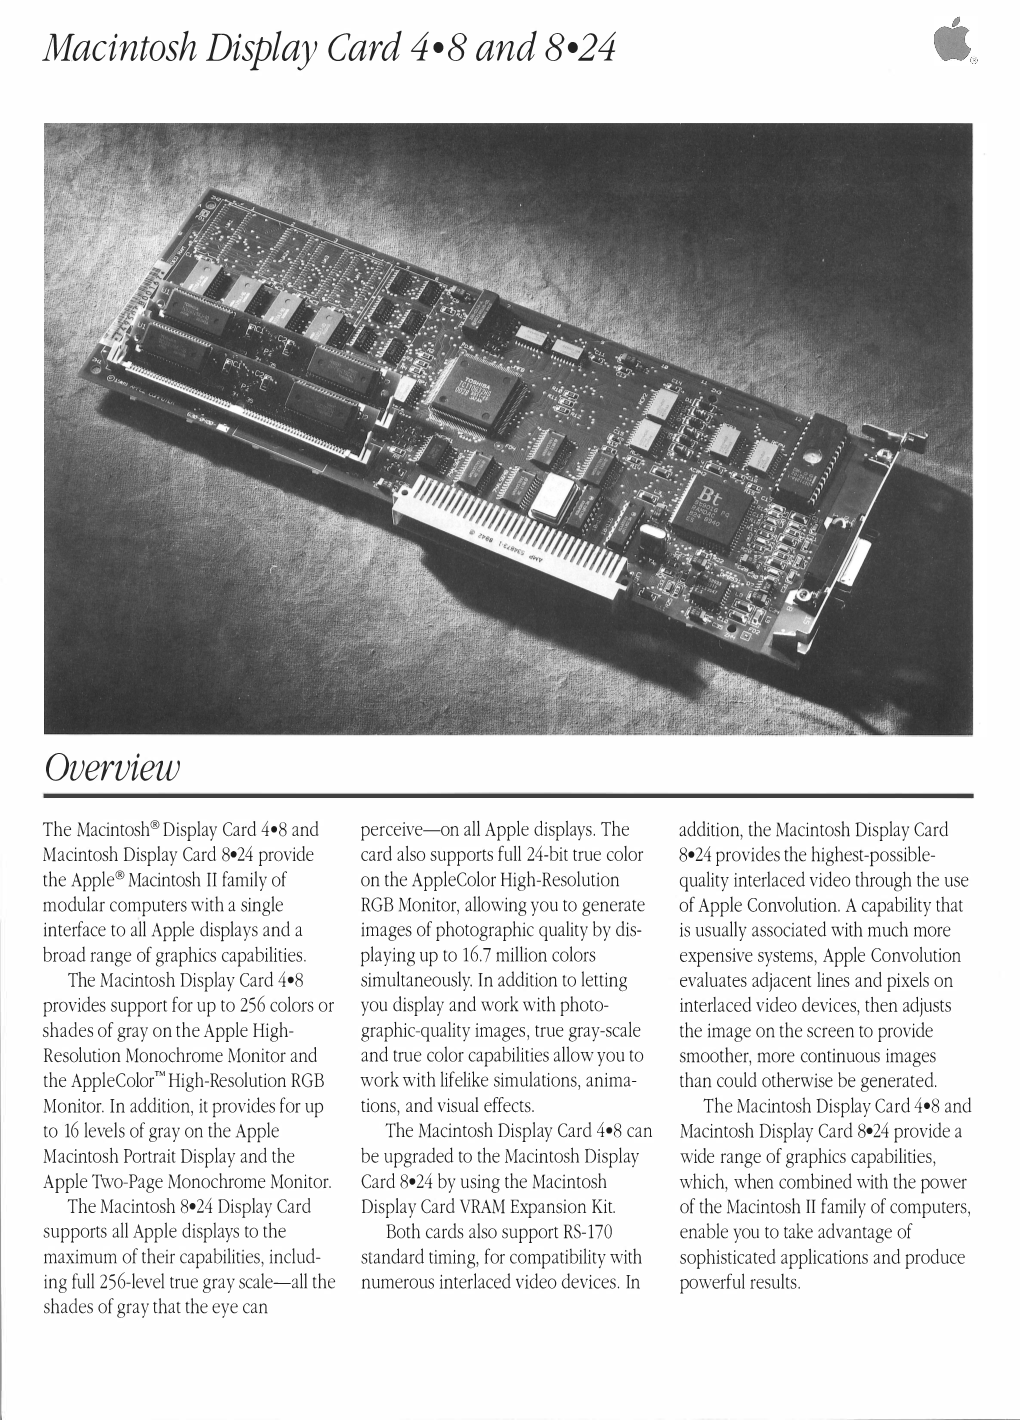 Macintosh Display Card 4•8 and 8•24 Overview